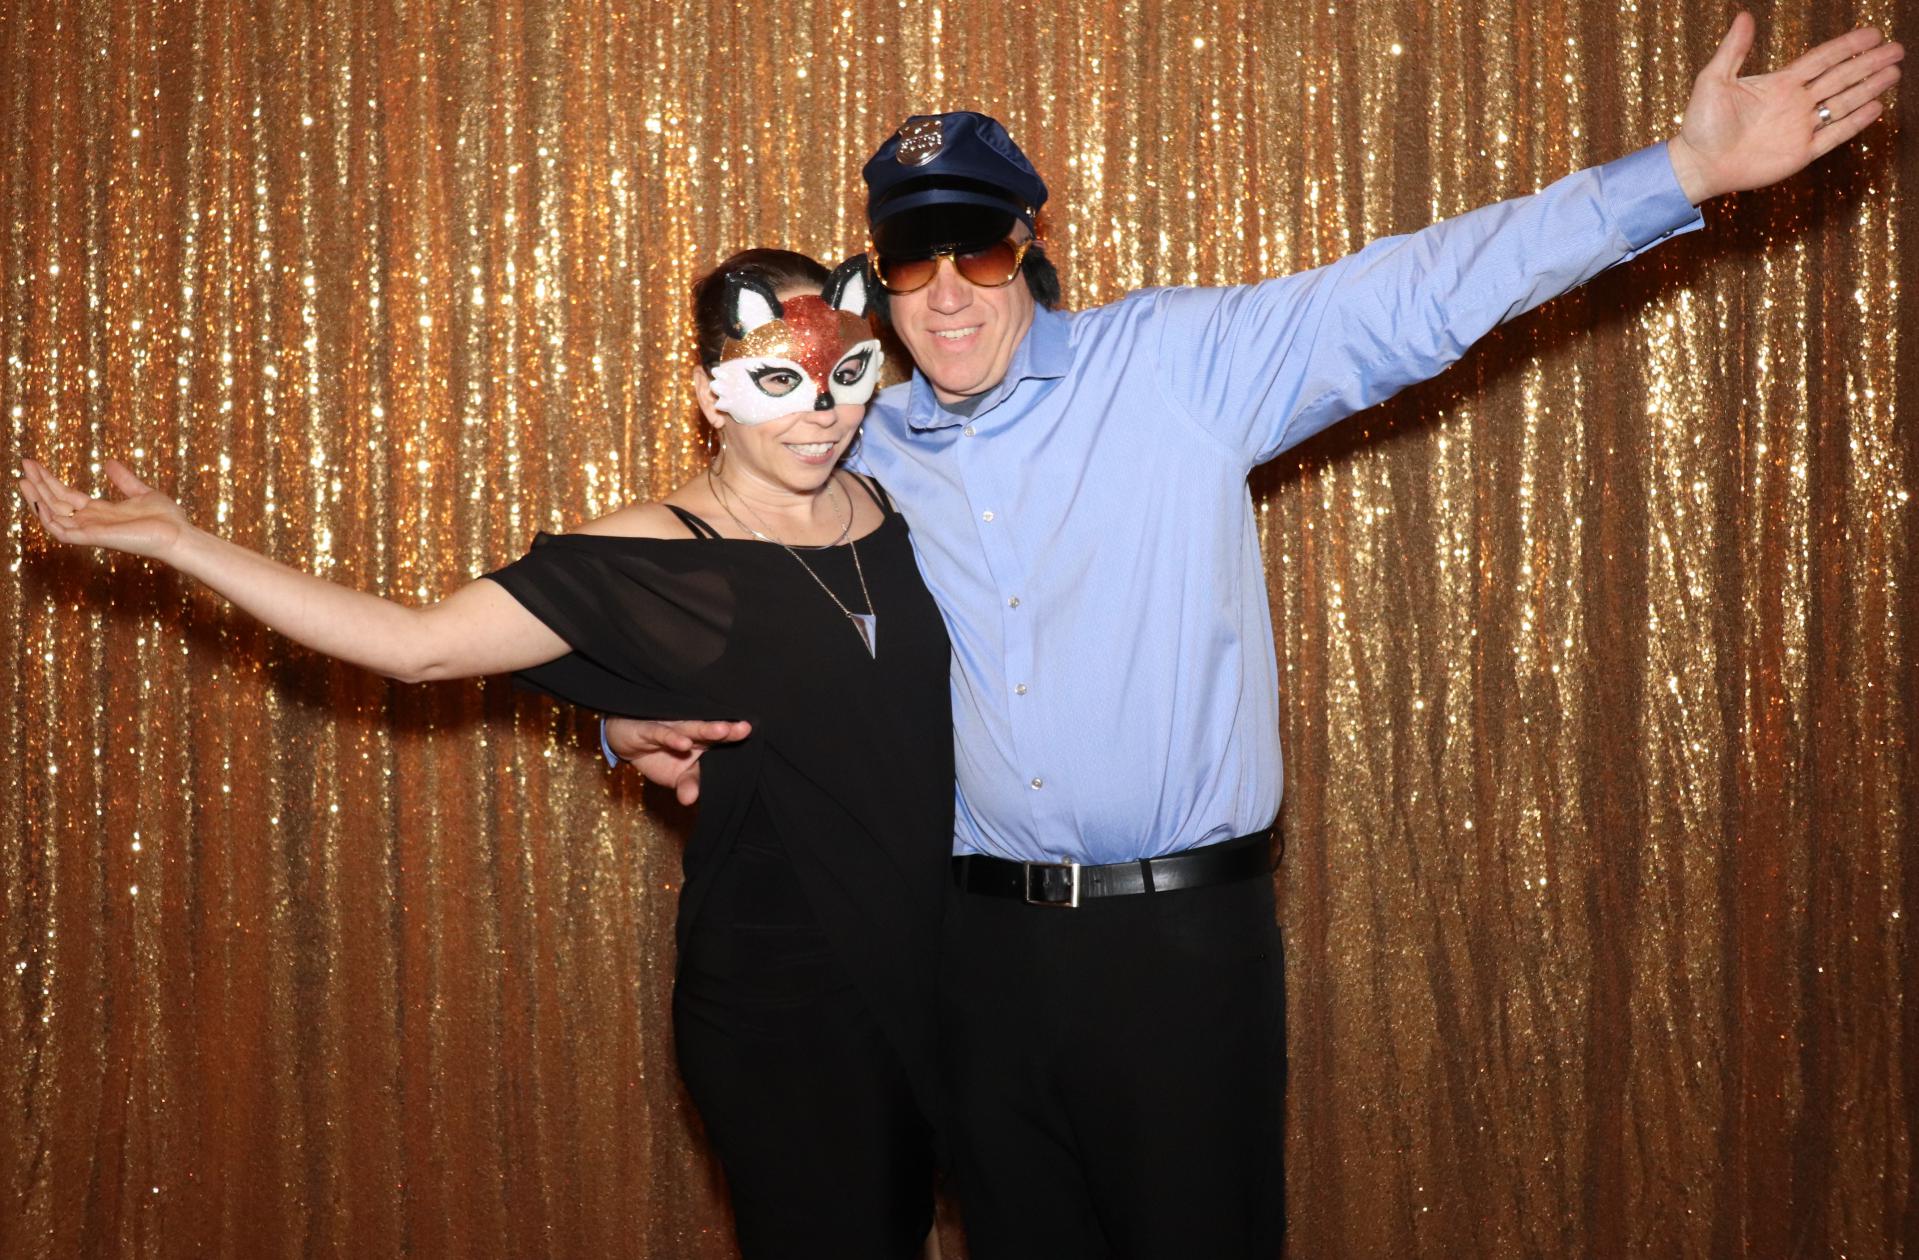 St. Catharines Photo Booth Rental